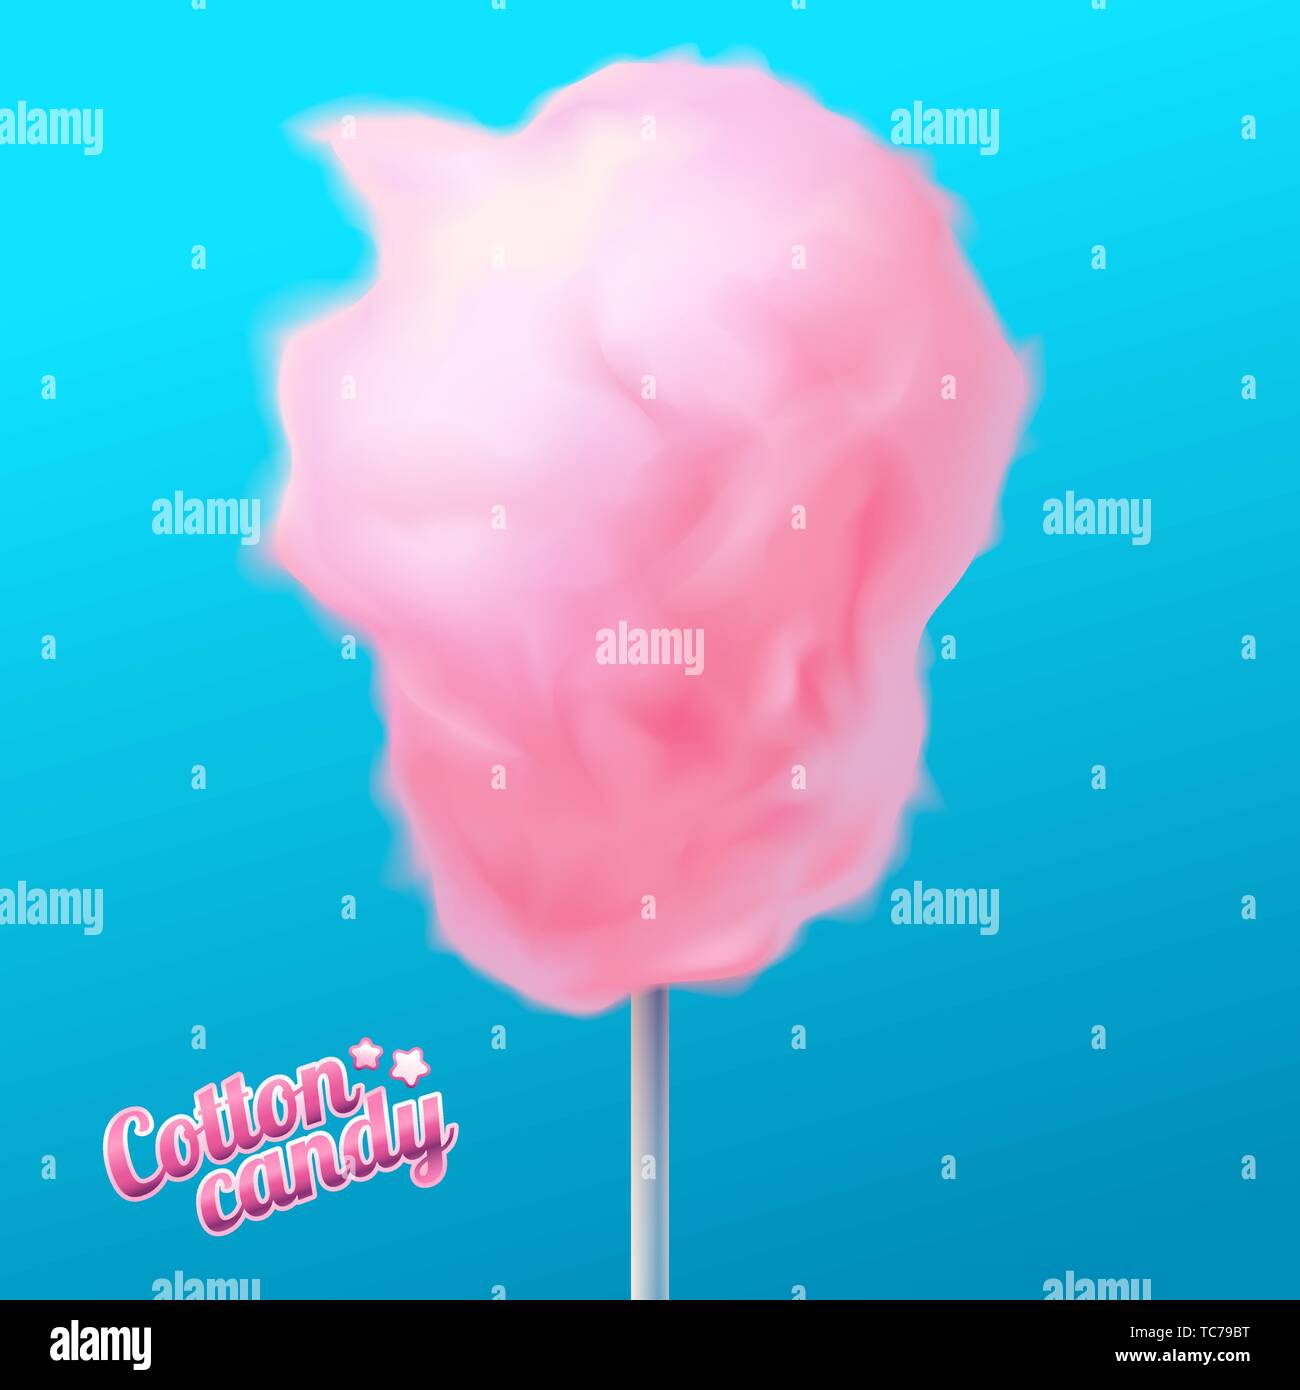 Pink cotton candy on stick, sugar cloud, tasty dessert, poster with text, isolated on blue background vector illustration. Stock Vector